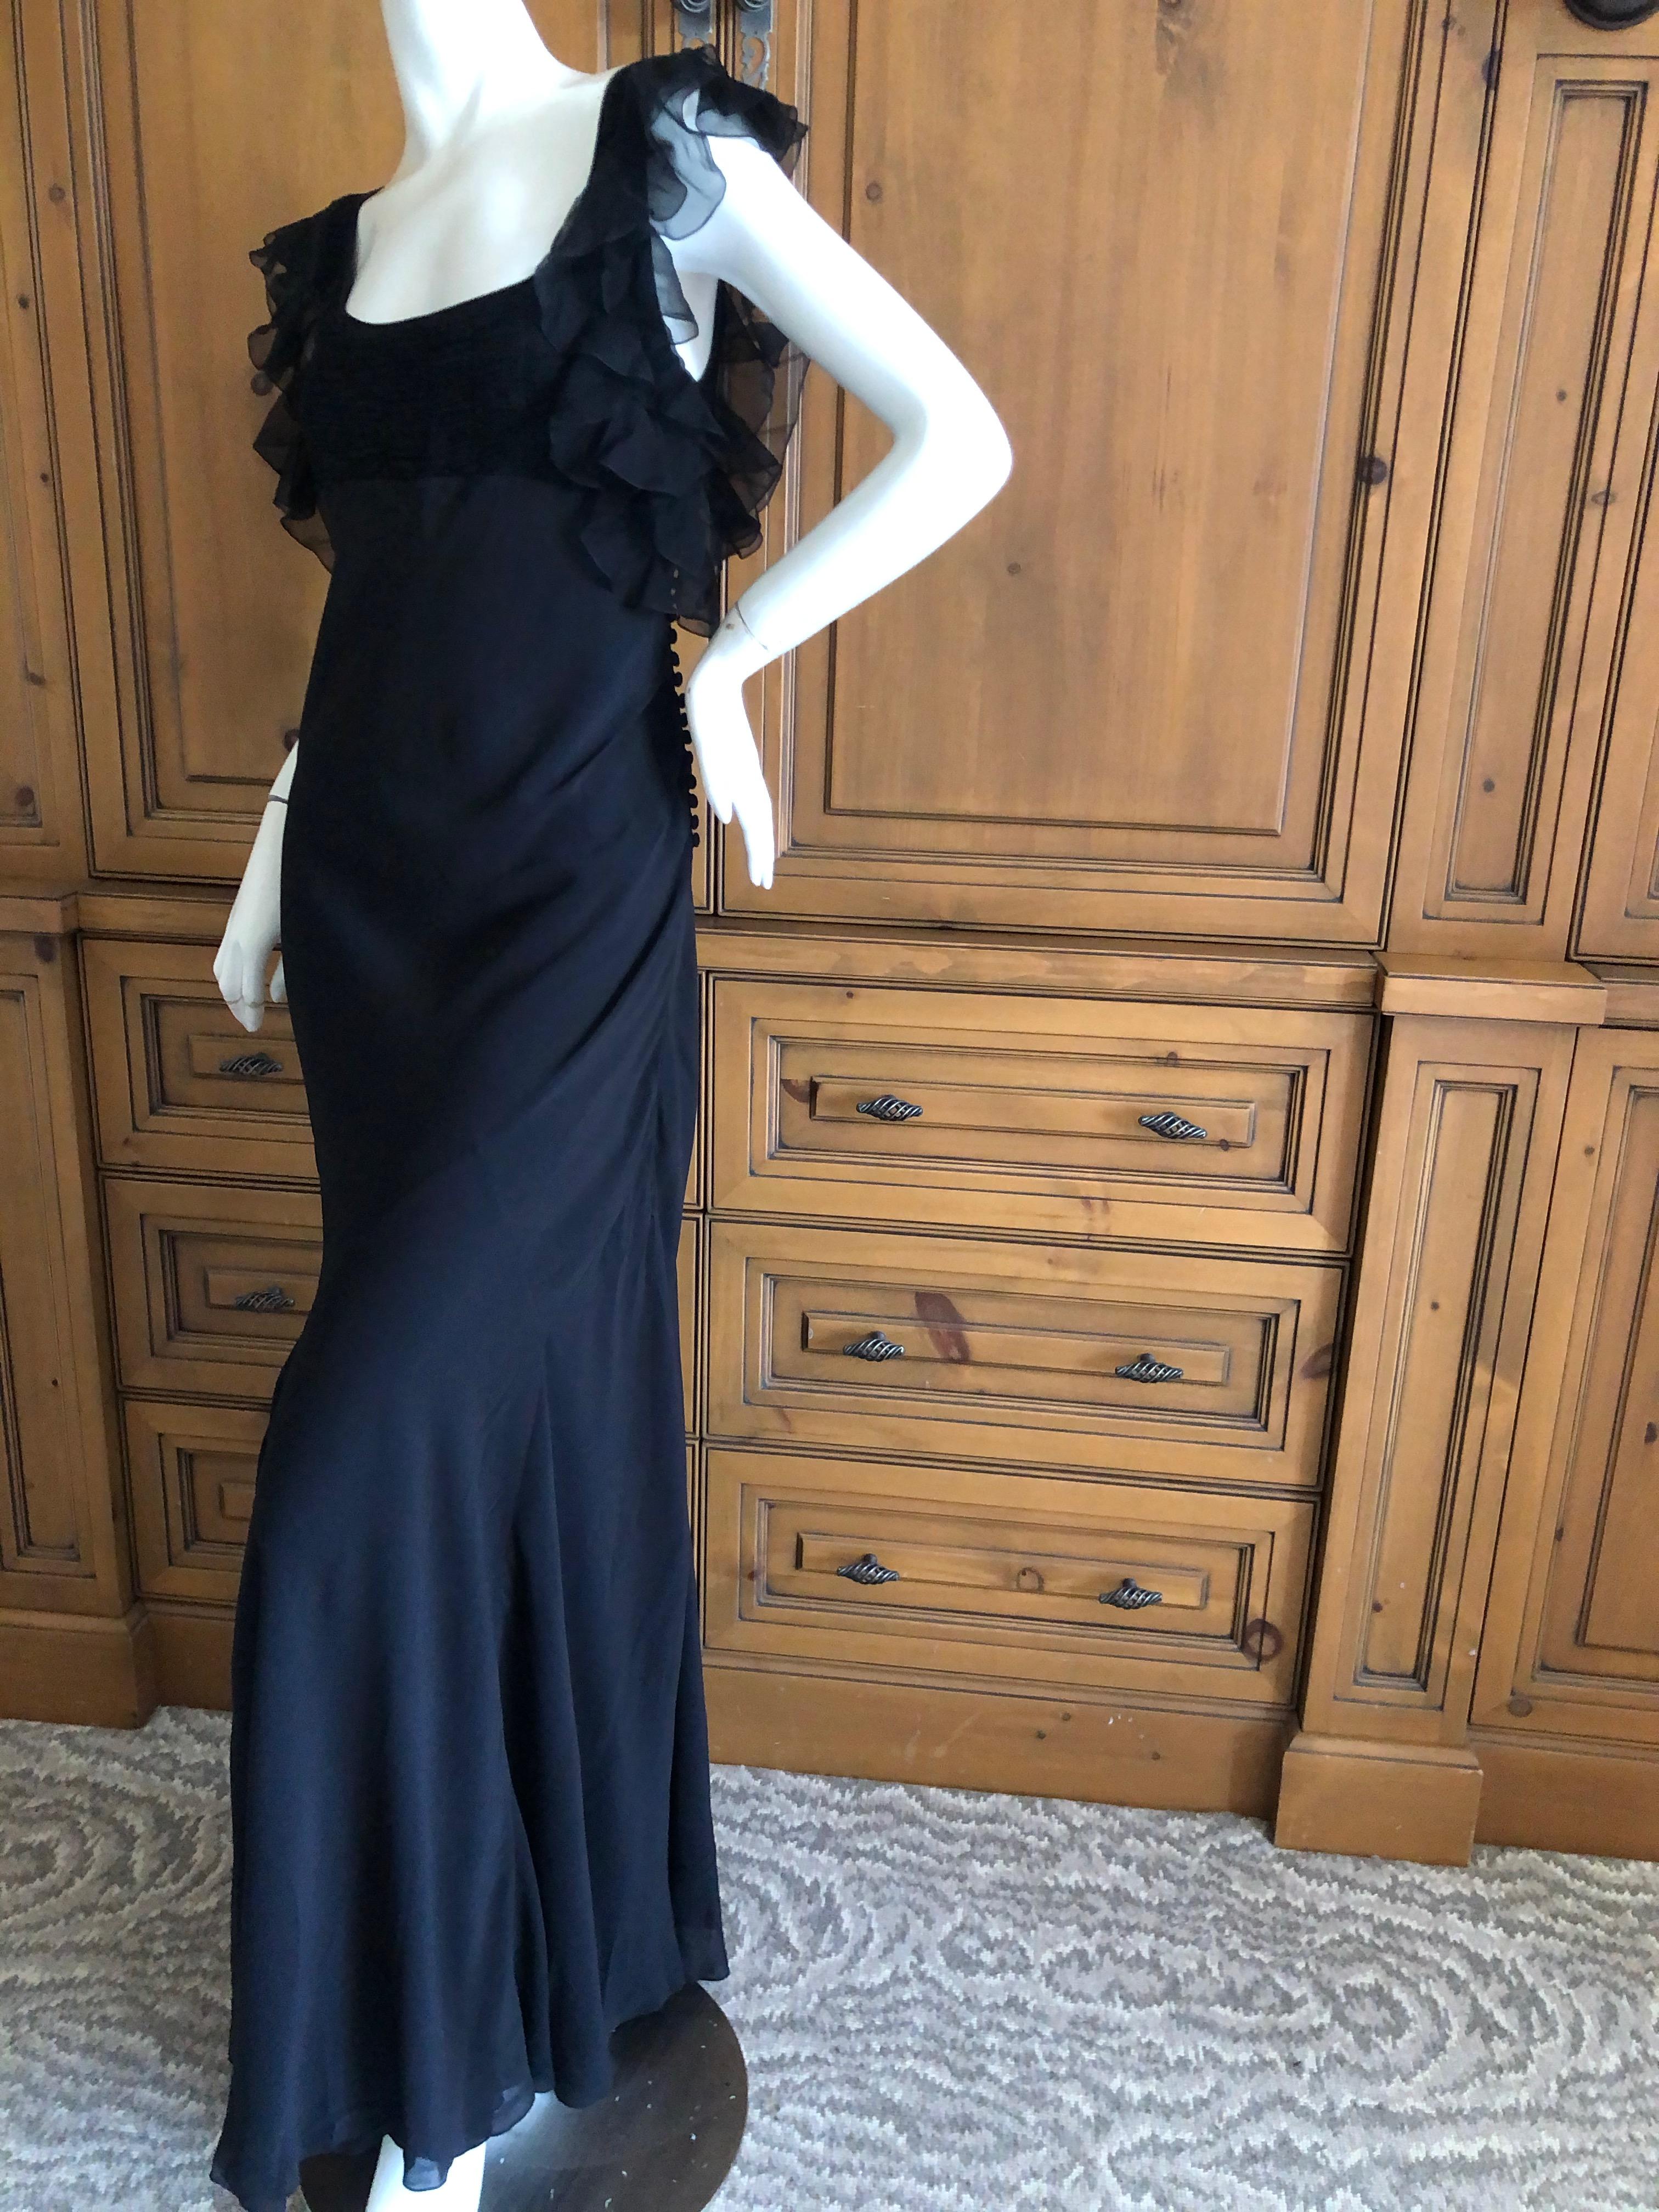 John Galliano Vintage Black Bias Cut Empire Style Evening Dress with Ruffles For Sale 4